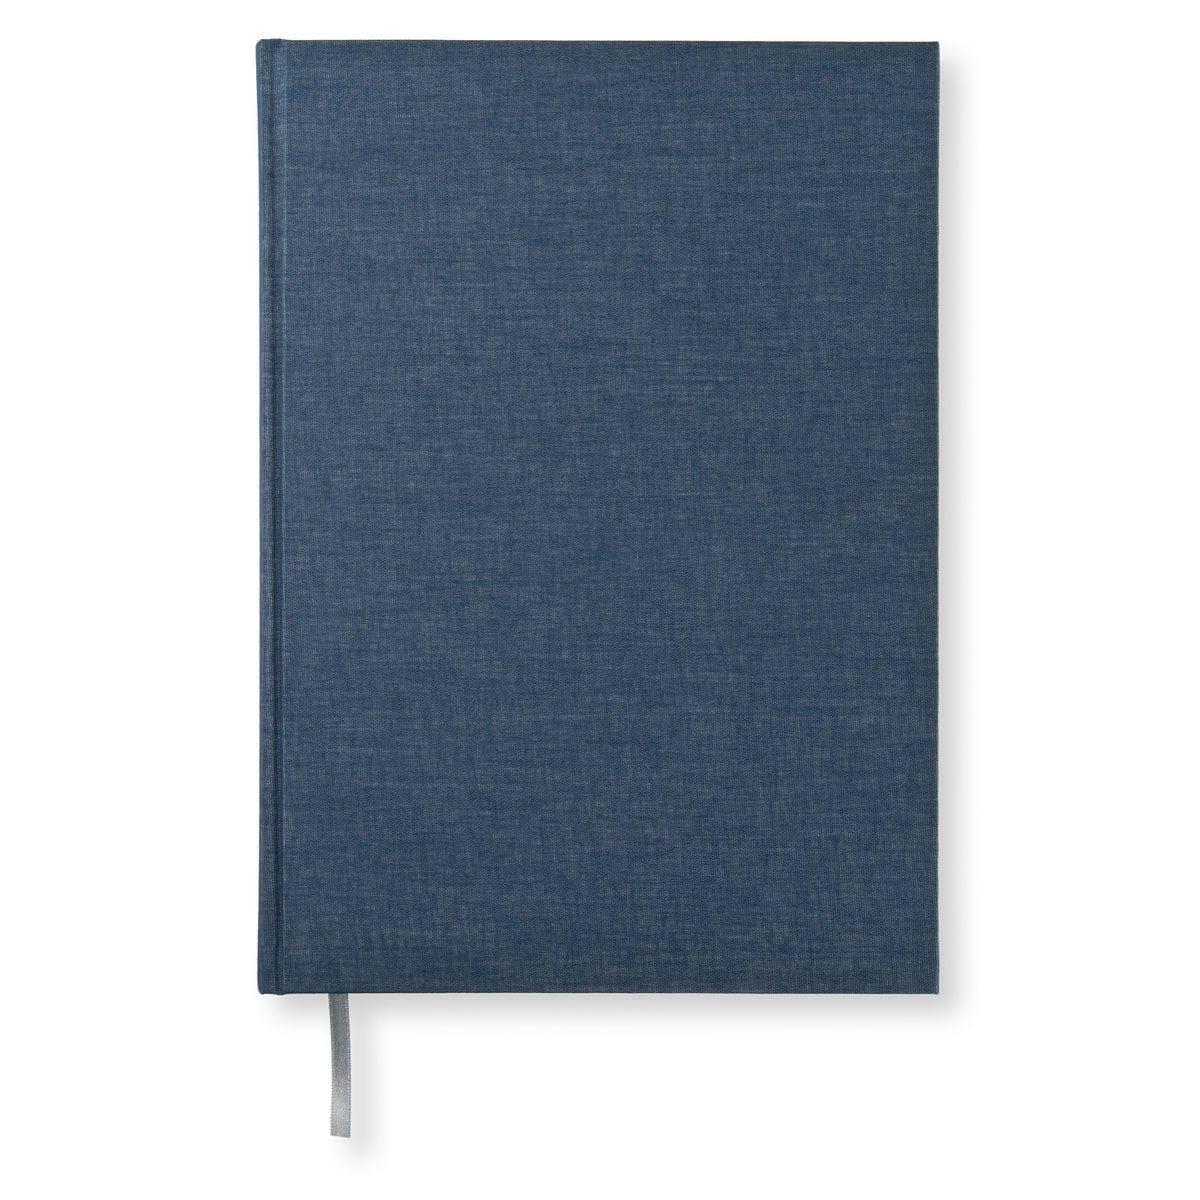 PaperStyle PS NOTEBOOK A4 Ruled Dark Denim